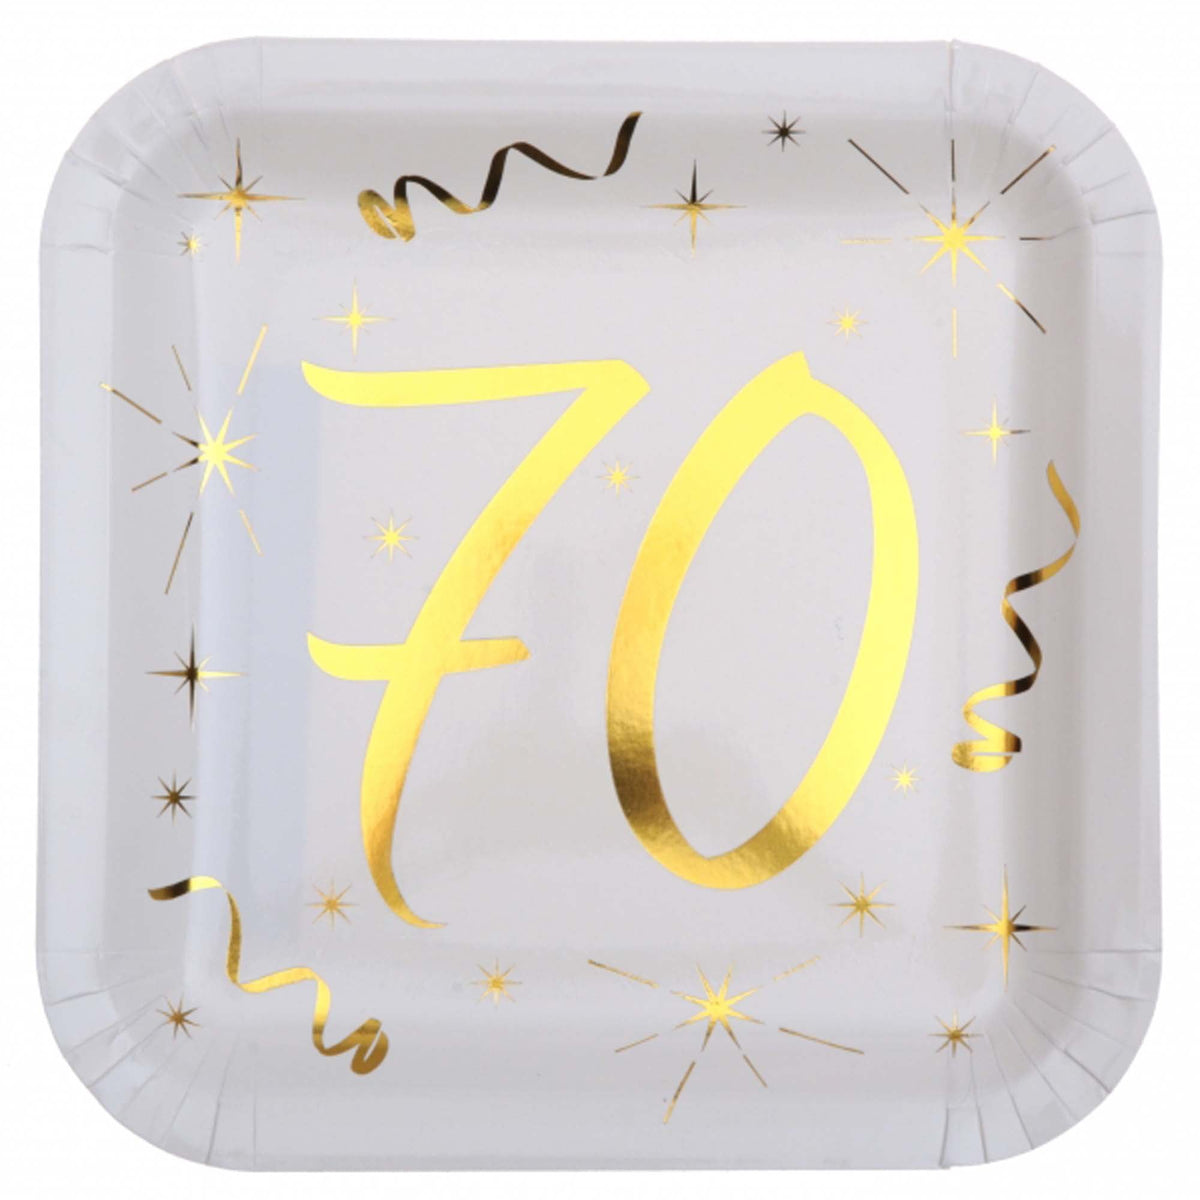 SANTEX General Birthday Starry Golden Age 70th Birthday Large Square Lunch Paper Plates, 9 Inches, 10 Count 3660380040439